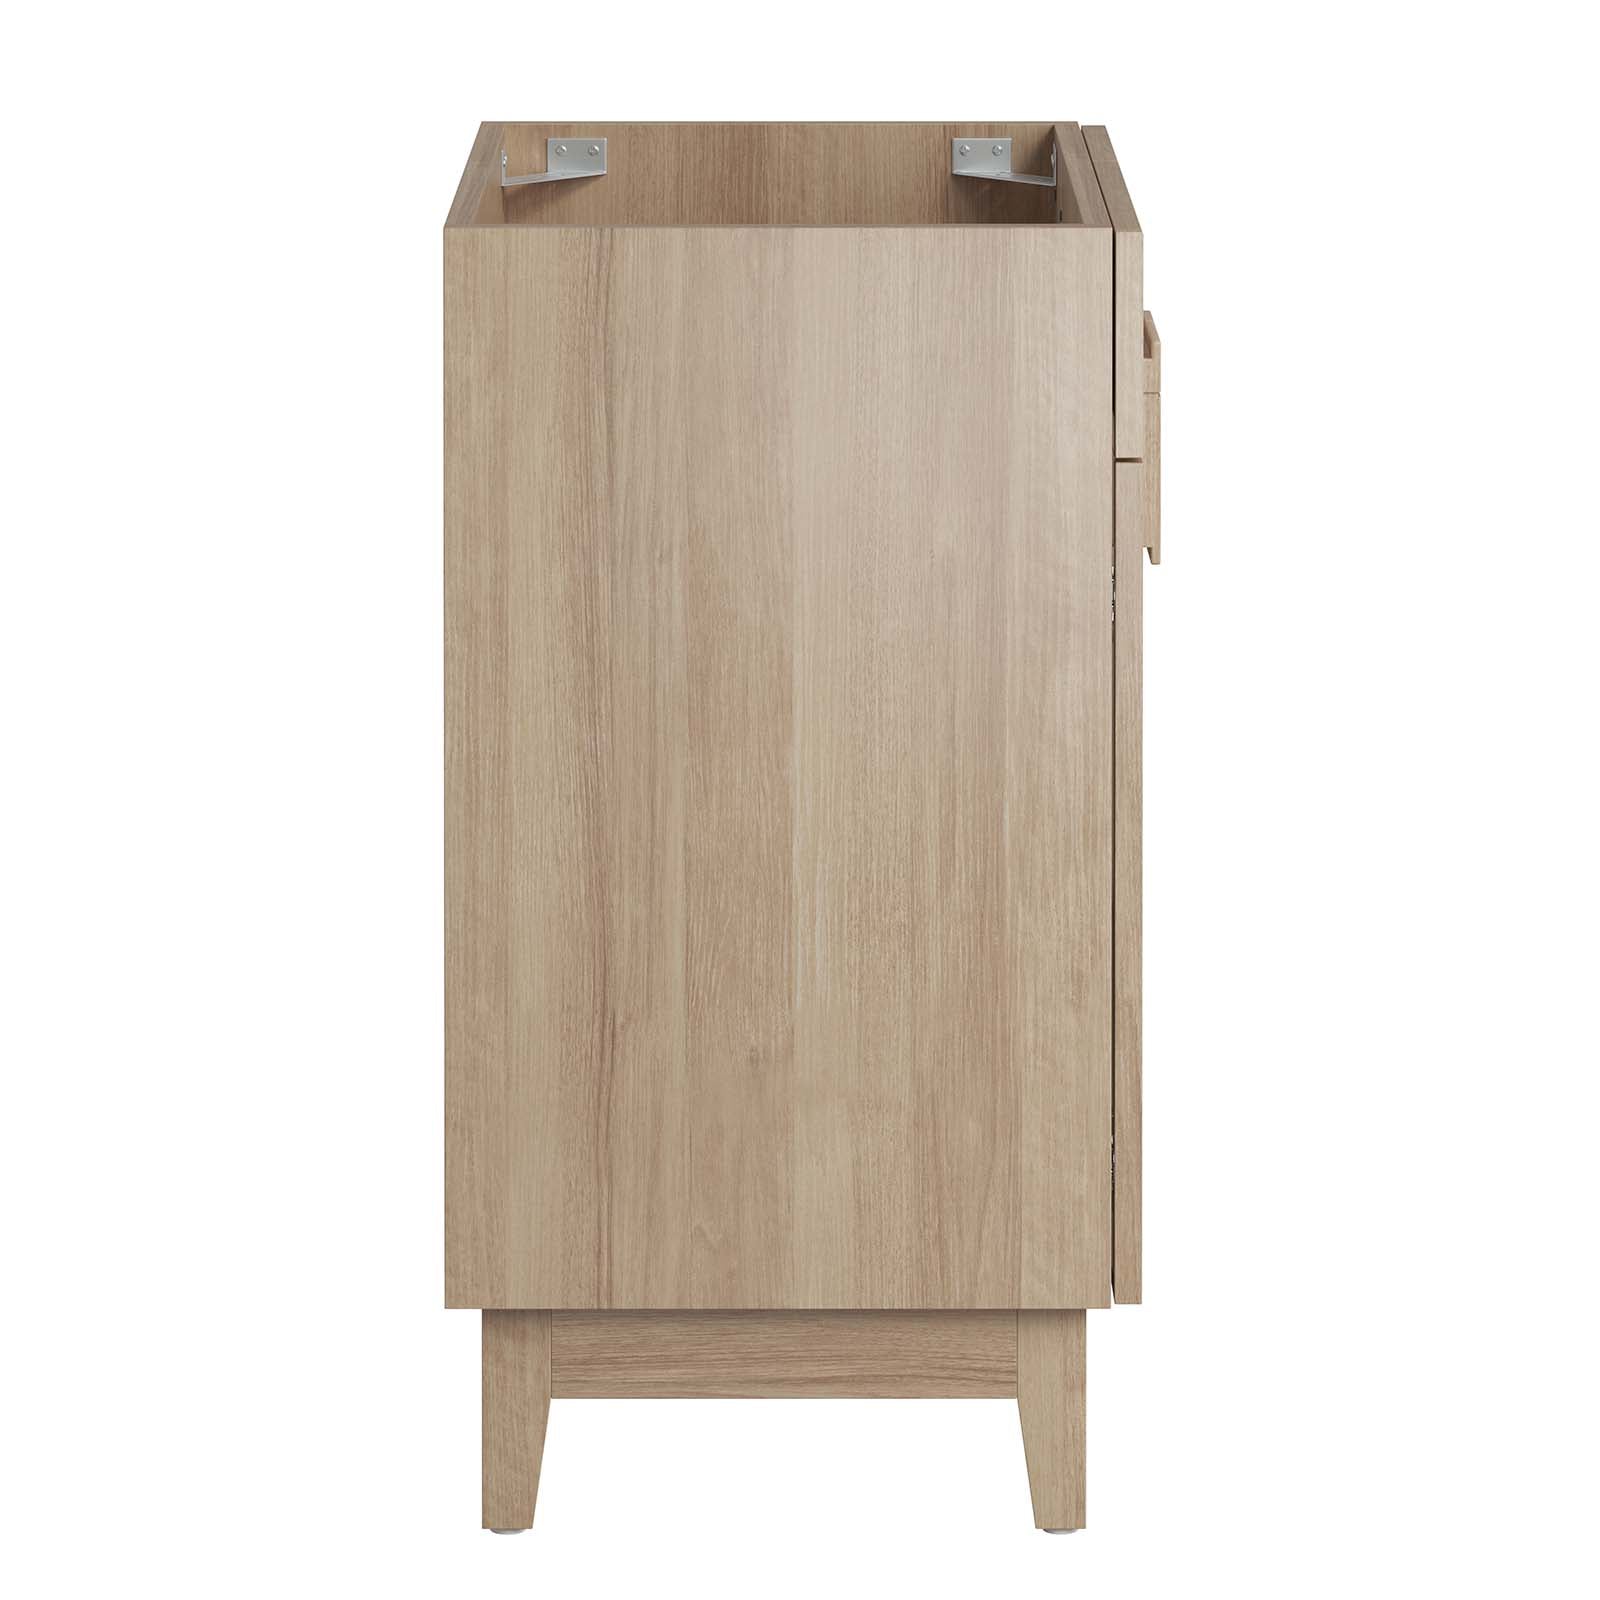 Miles 24” Bathroom Vanity Cabinet (Sink Basin Not Included) By Modway - EEI-6399 | Bathroom Accessories | Modway - 10